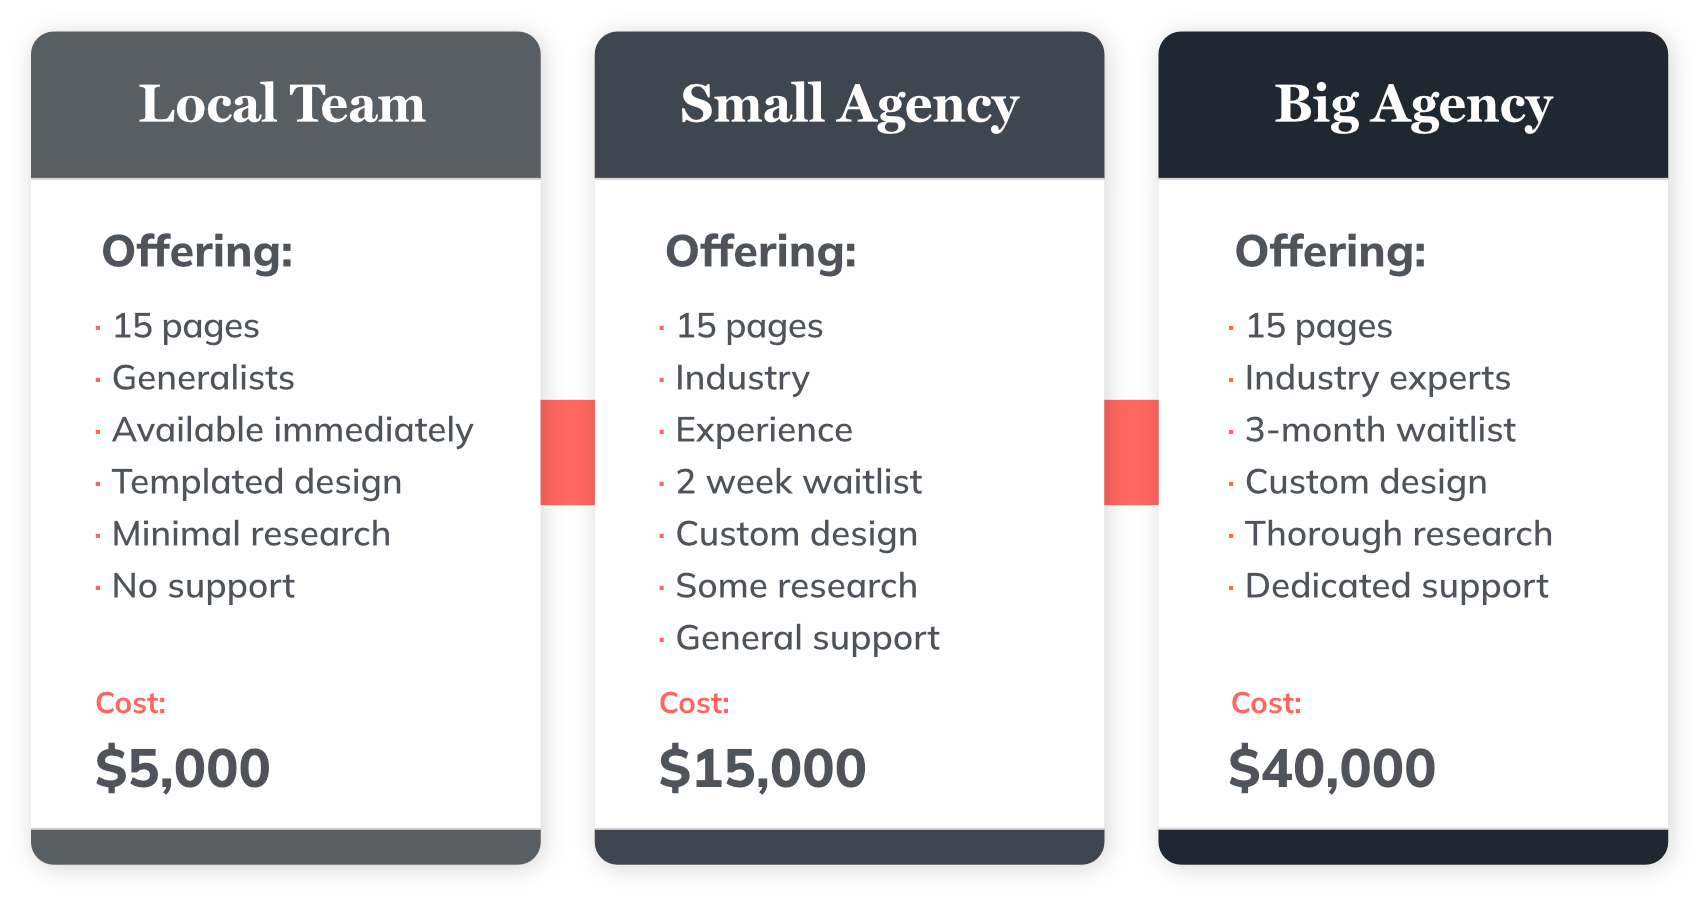 Graphic depicting the cost difference between a local team ($5,000), a small agency ($15,000) and a big agency ($40,000).